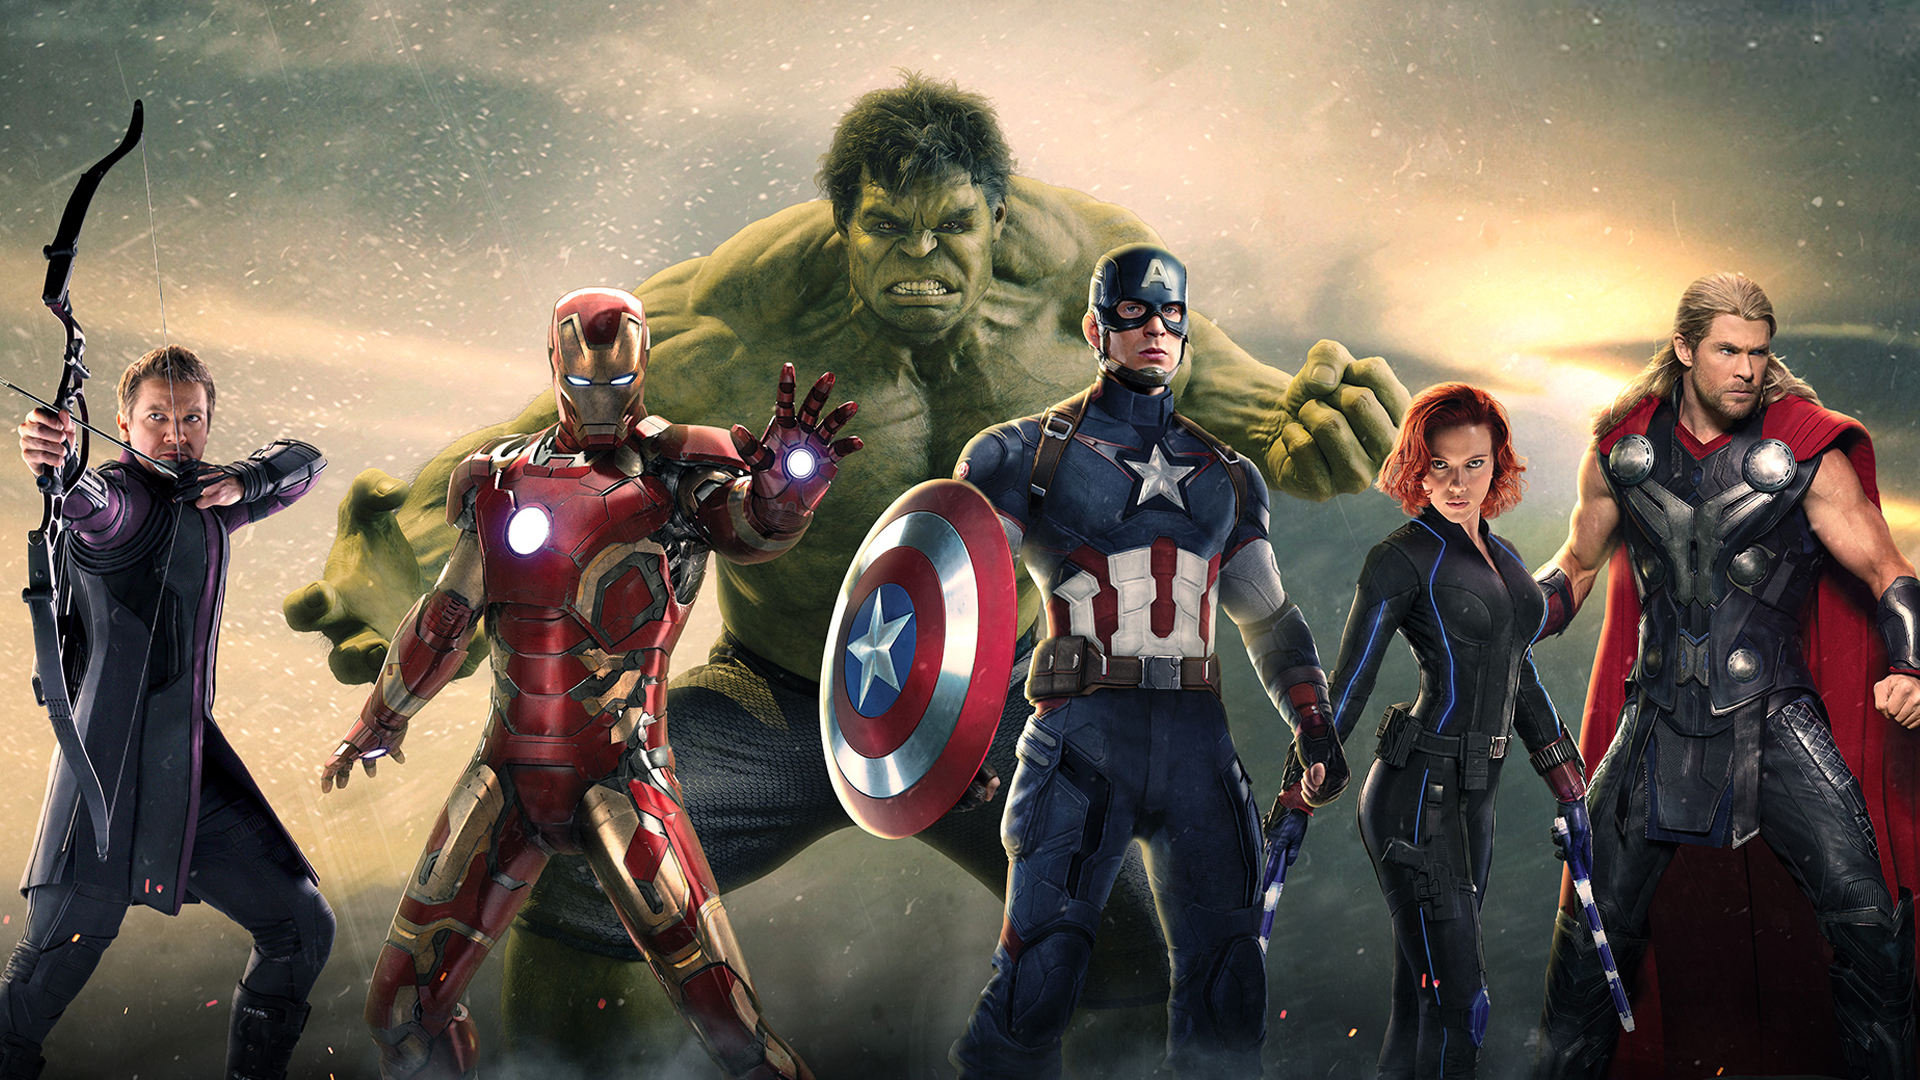 Avengers Age Of Ultron Wallpaper 1920x1080 by sachso74 on